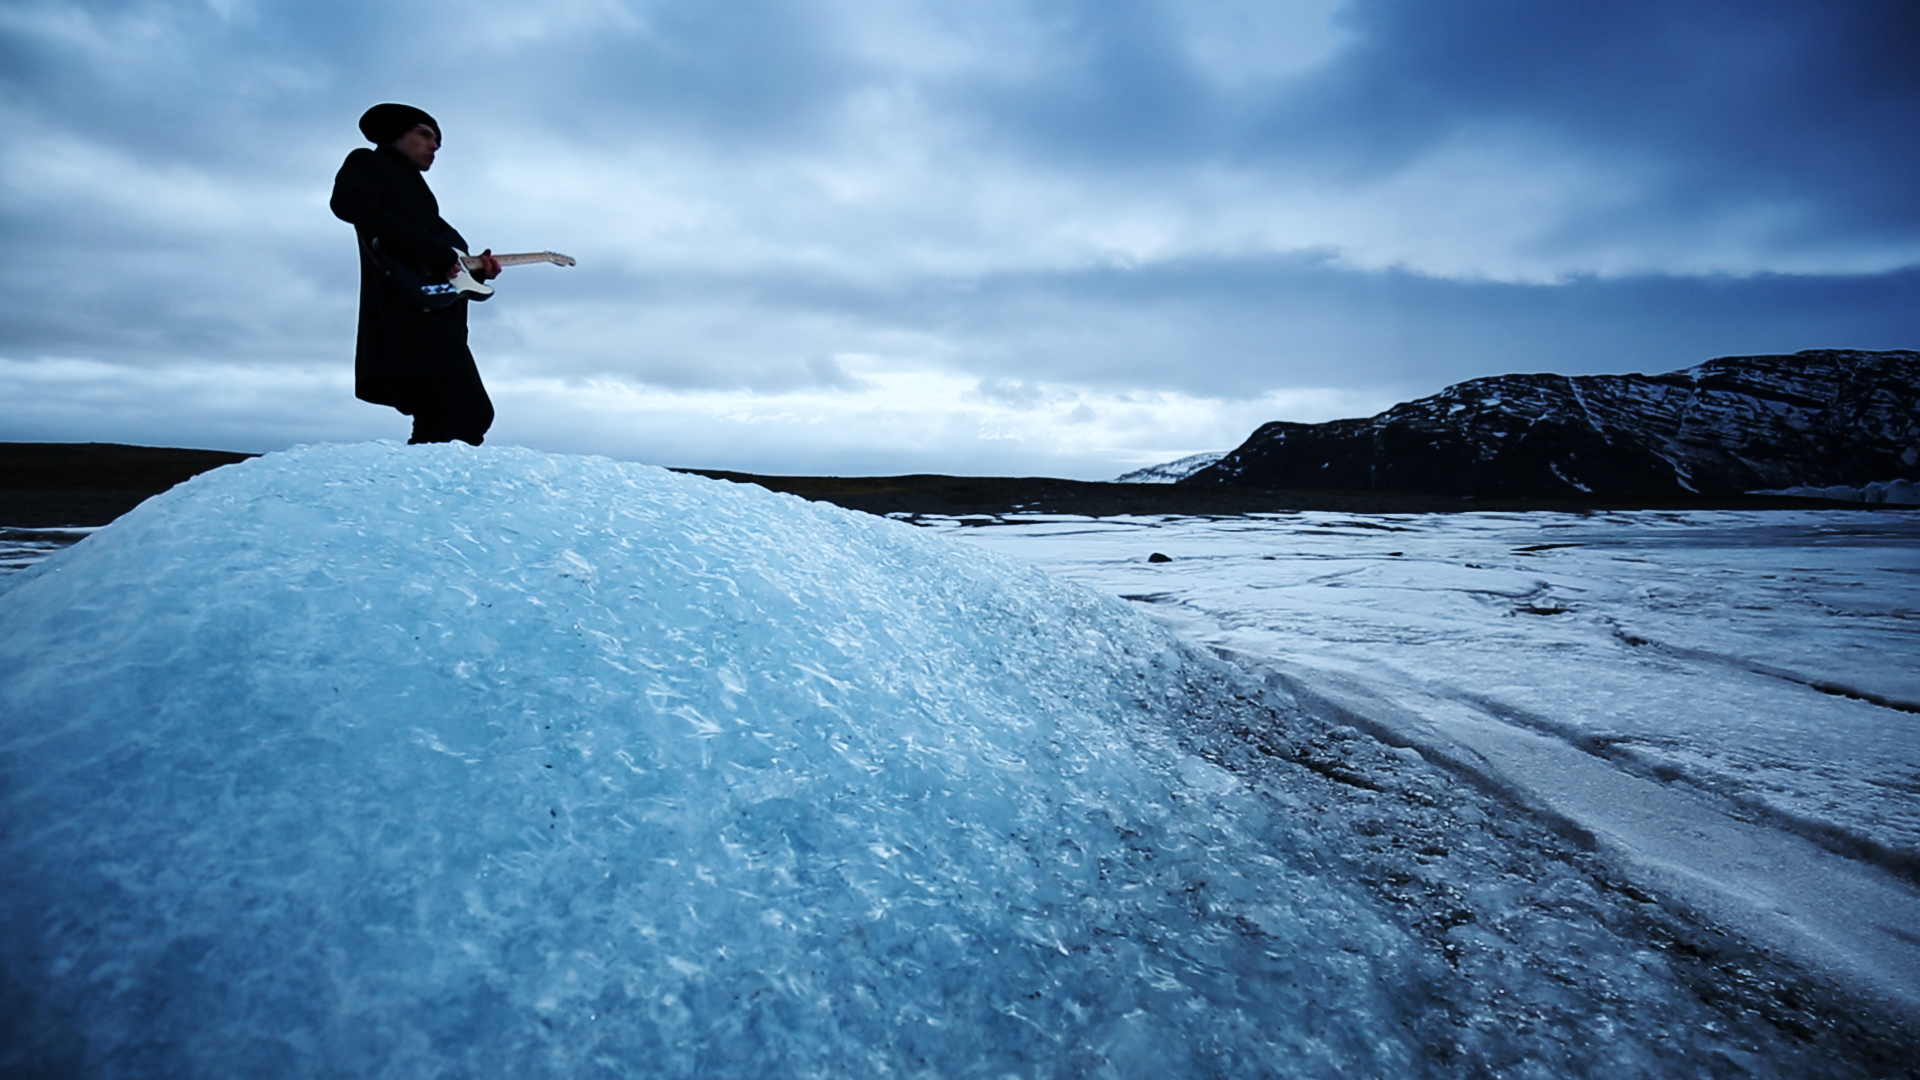 Adriano Miccoli filming in Iceland on an iceburg